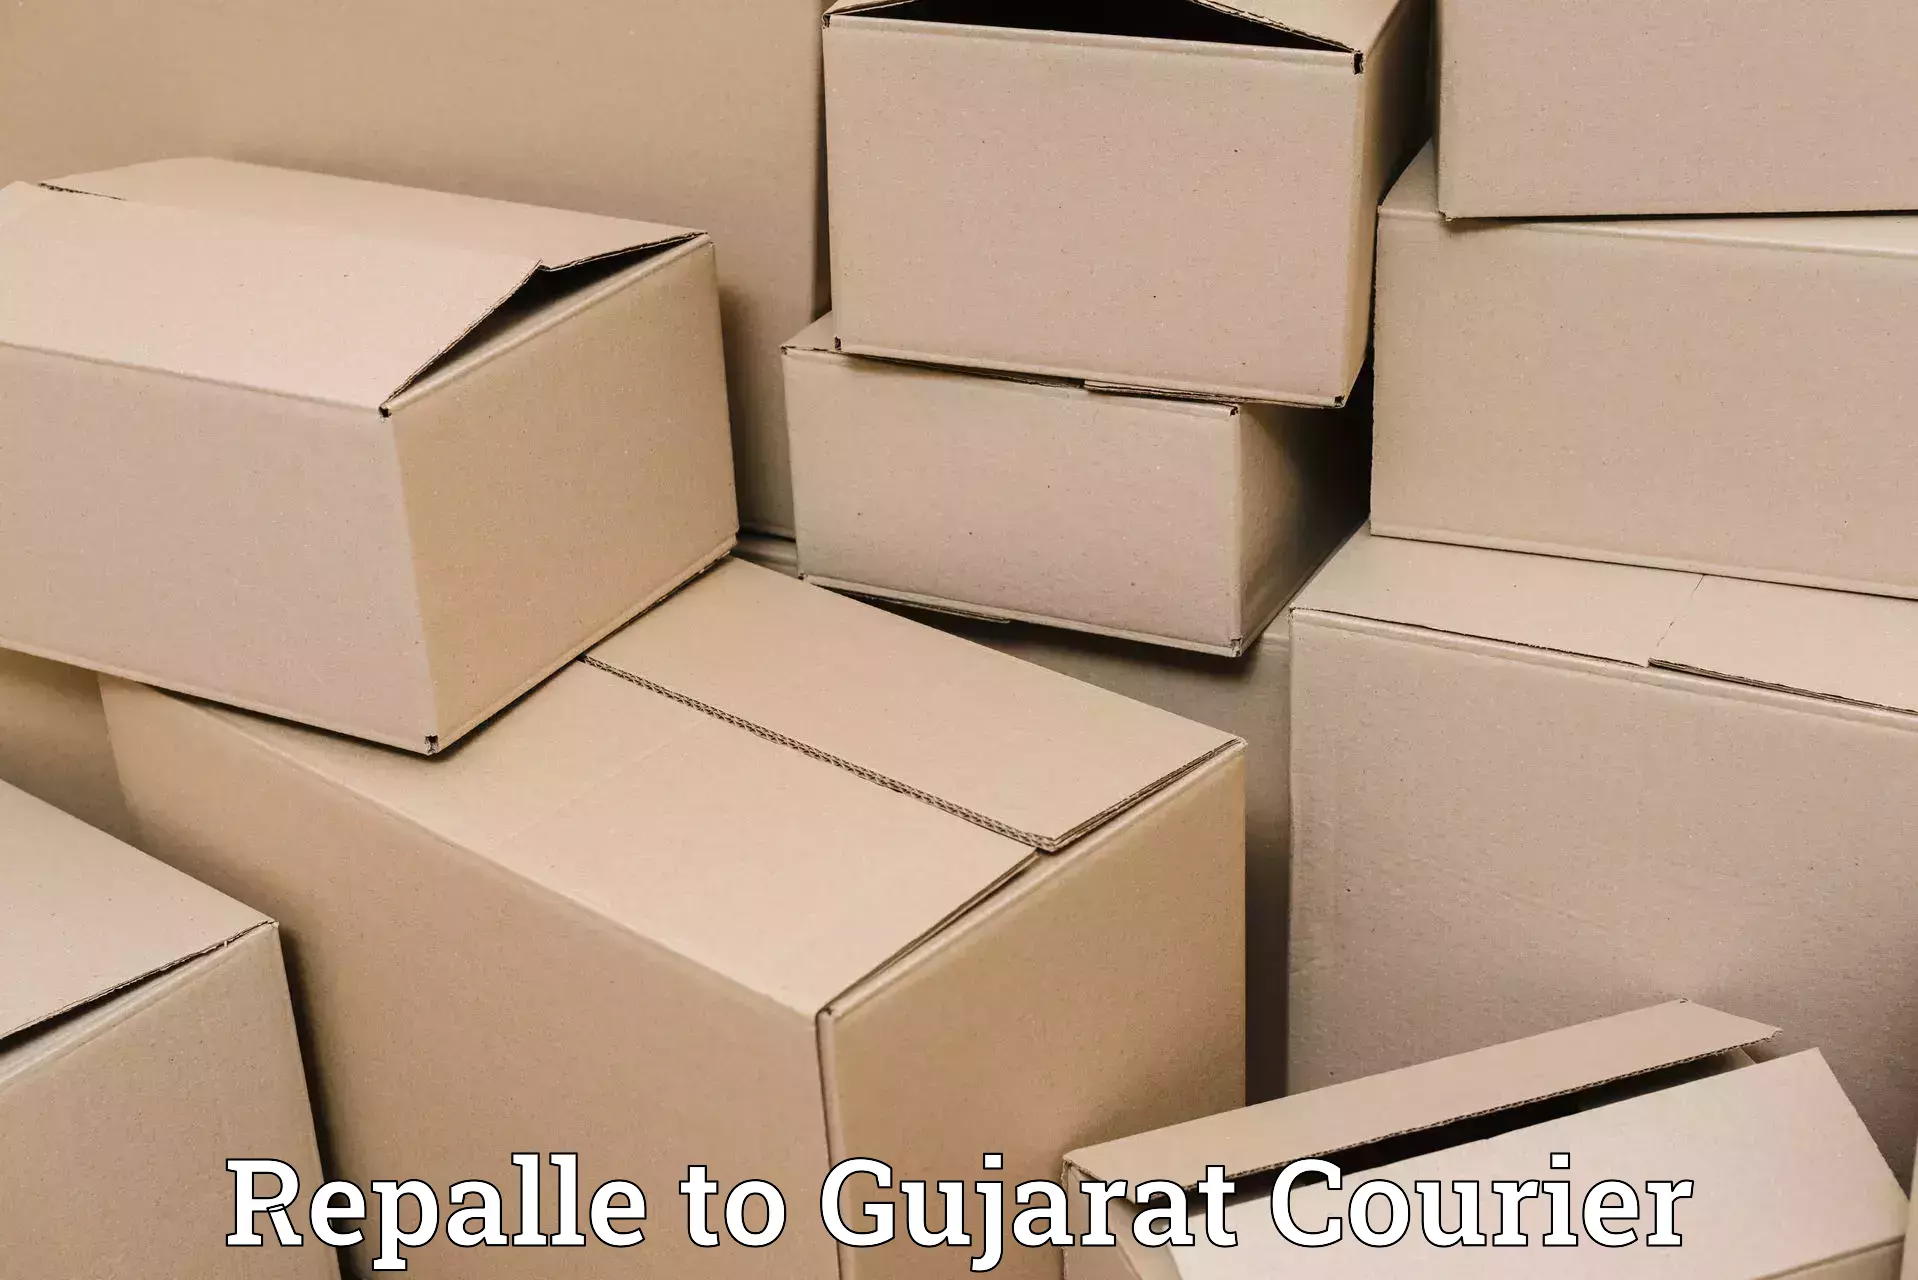 Hassle-free luggage shipping Repalle to Gujarat